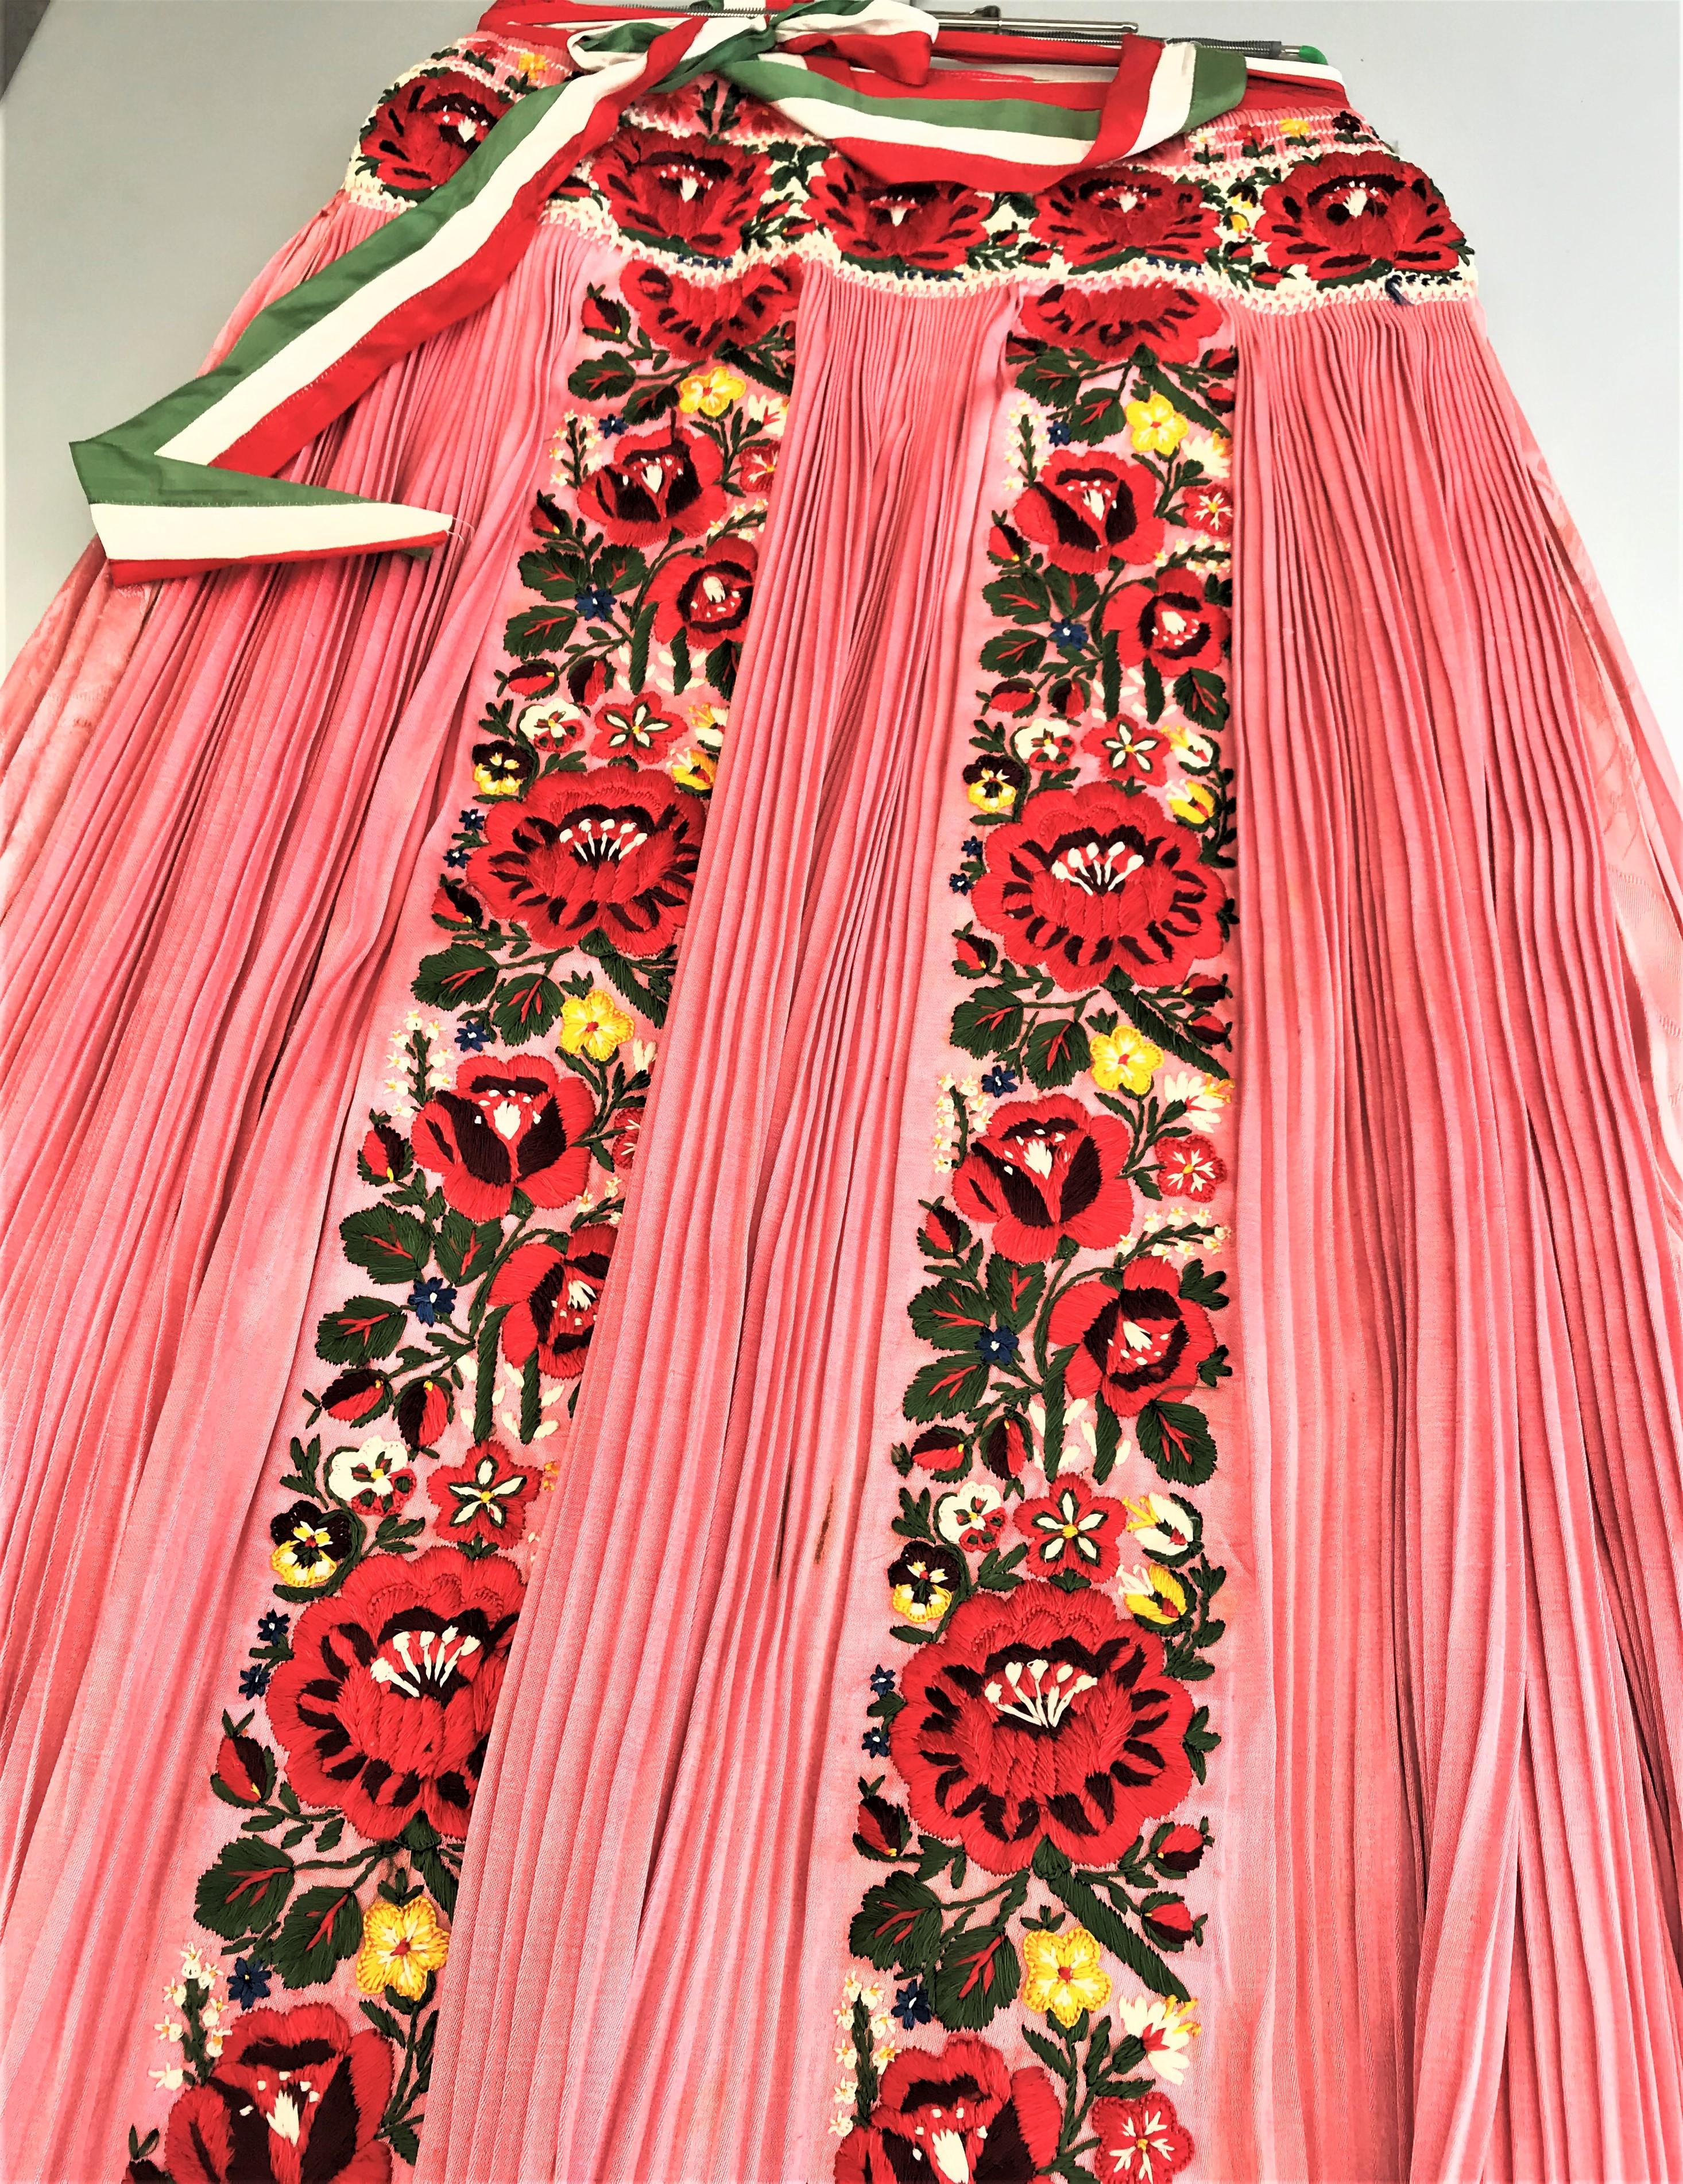 An original Hungarian traditional skirt and apron embroidered by hand, 1940 1